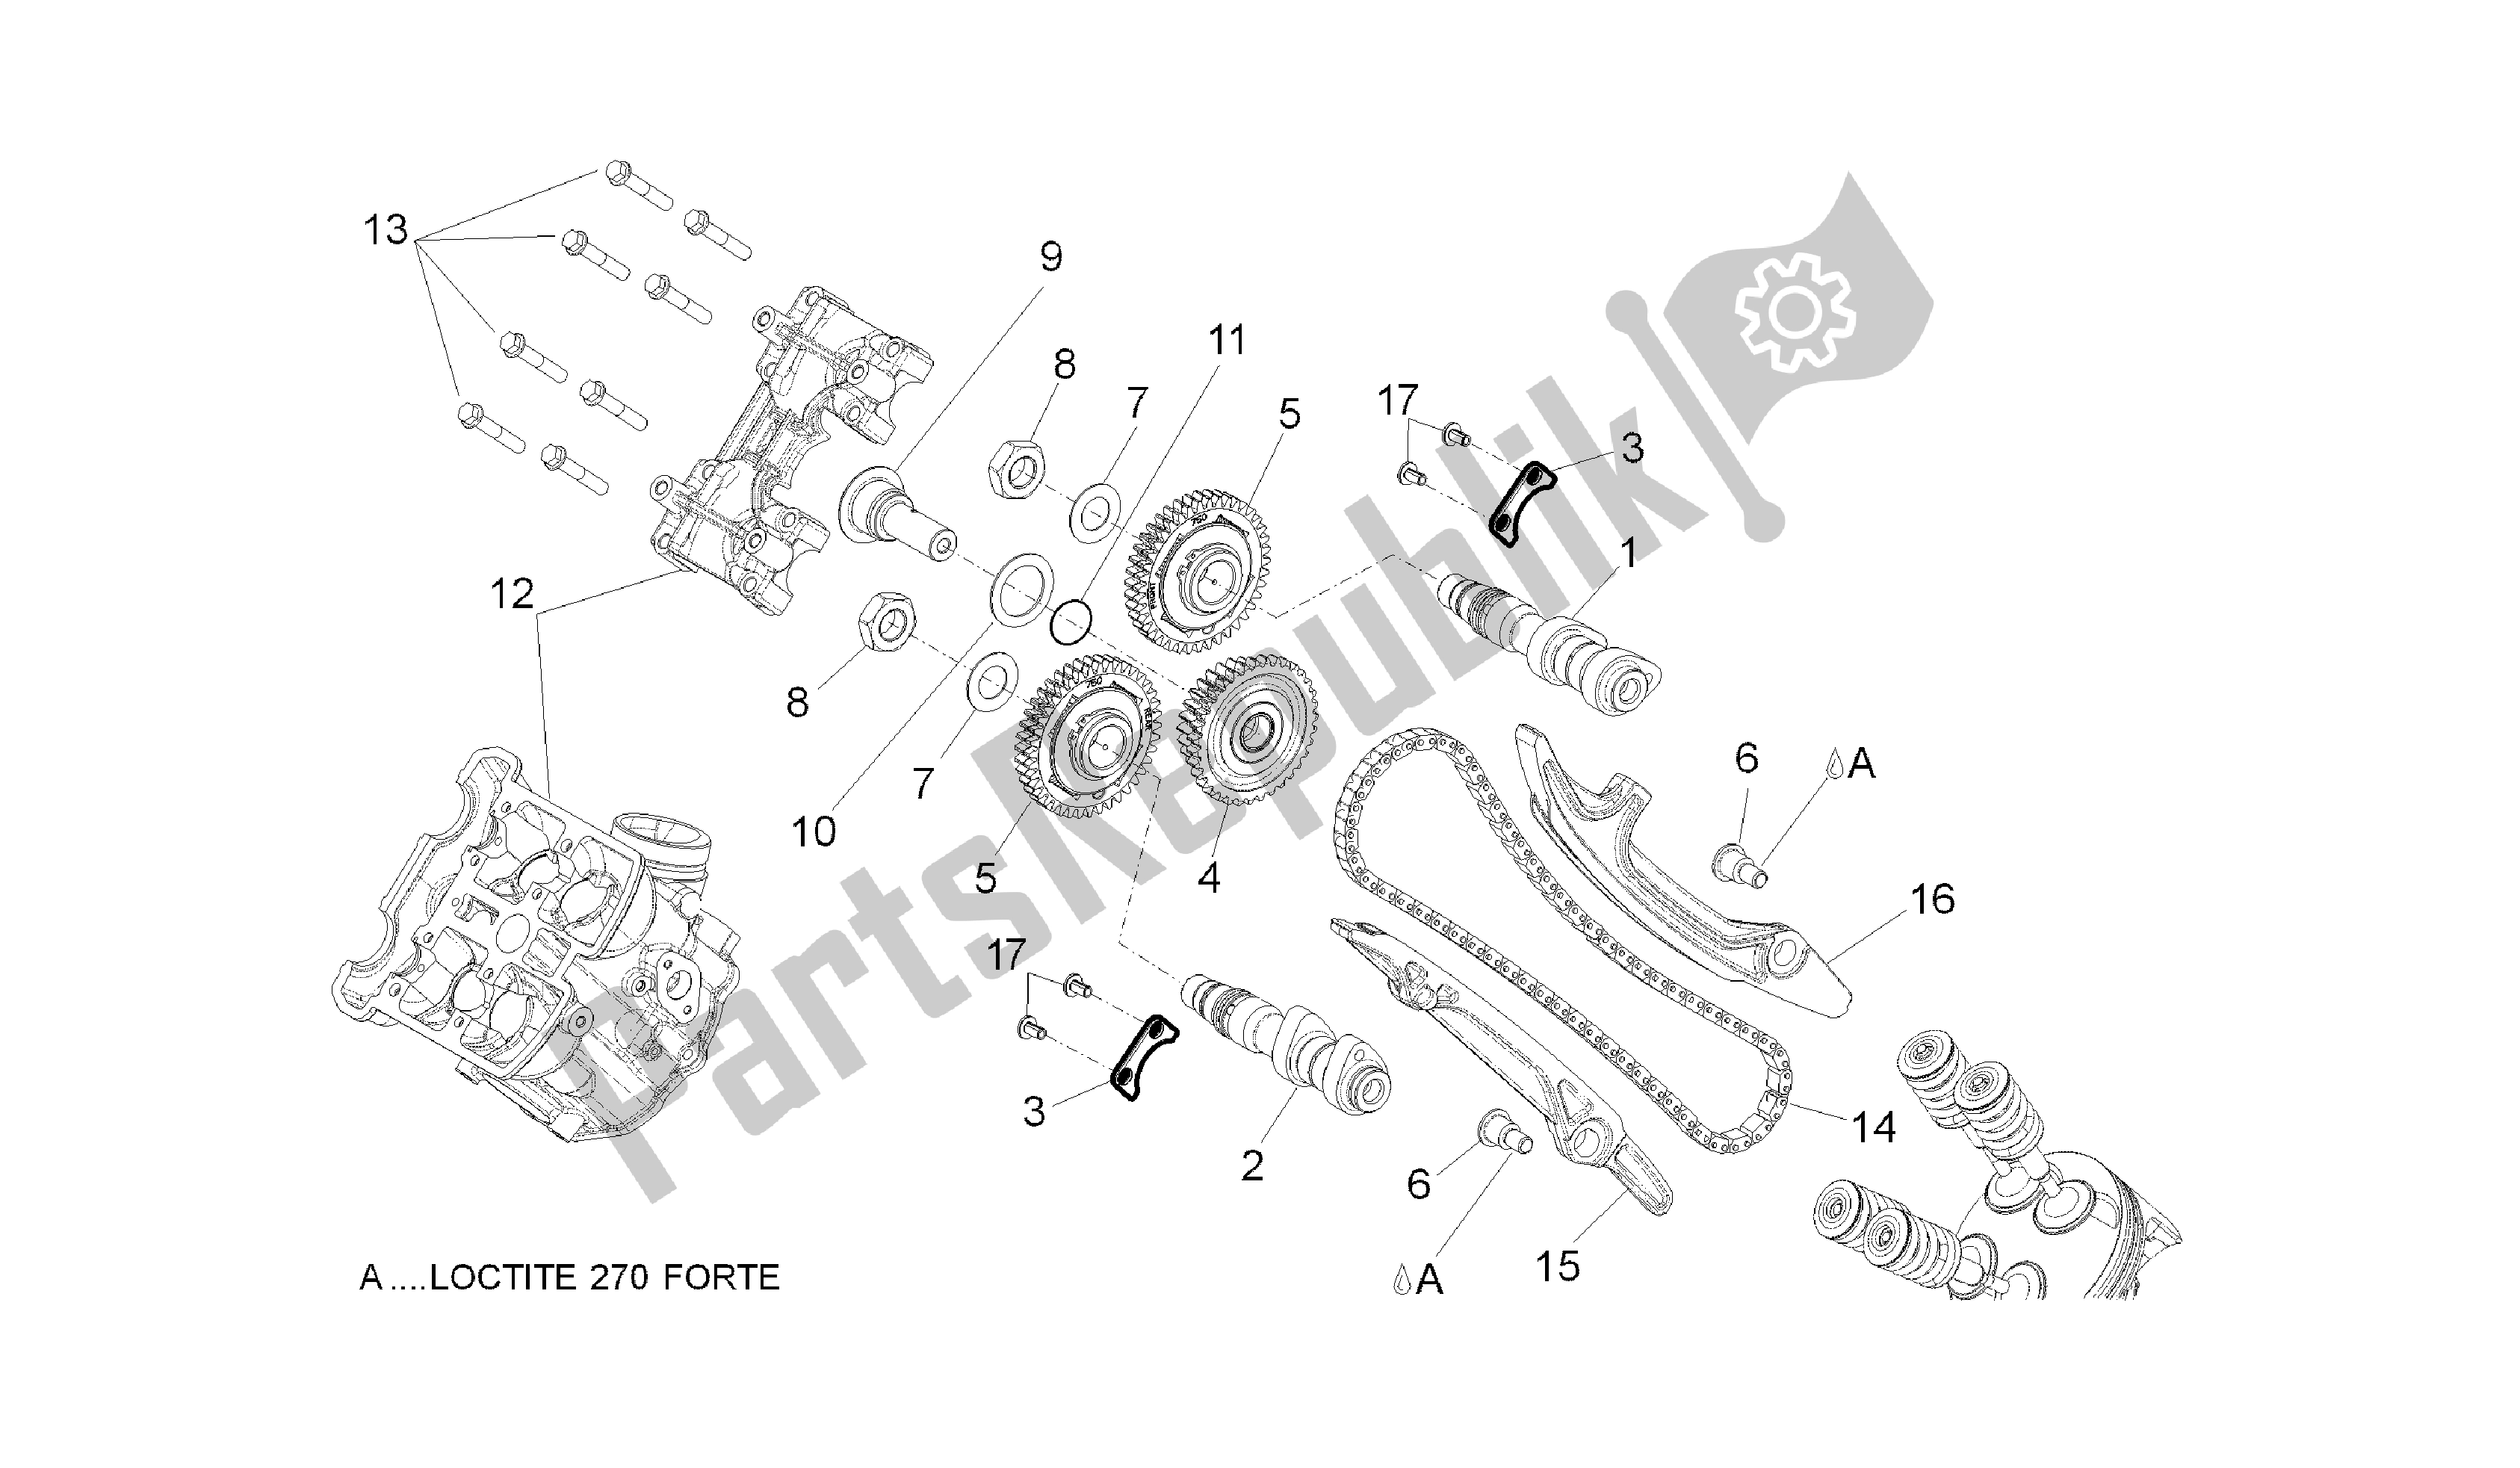 All parts for the Front Cylinder Timing System of the Aprilia Dorsoduro 750 2010